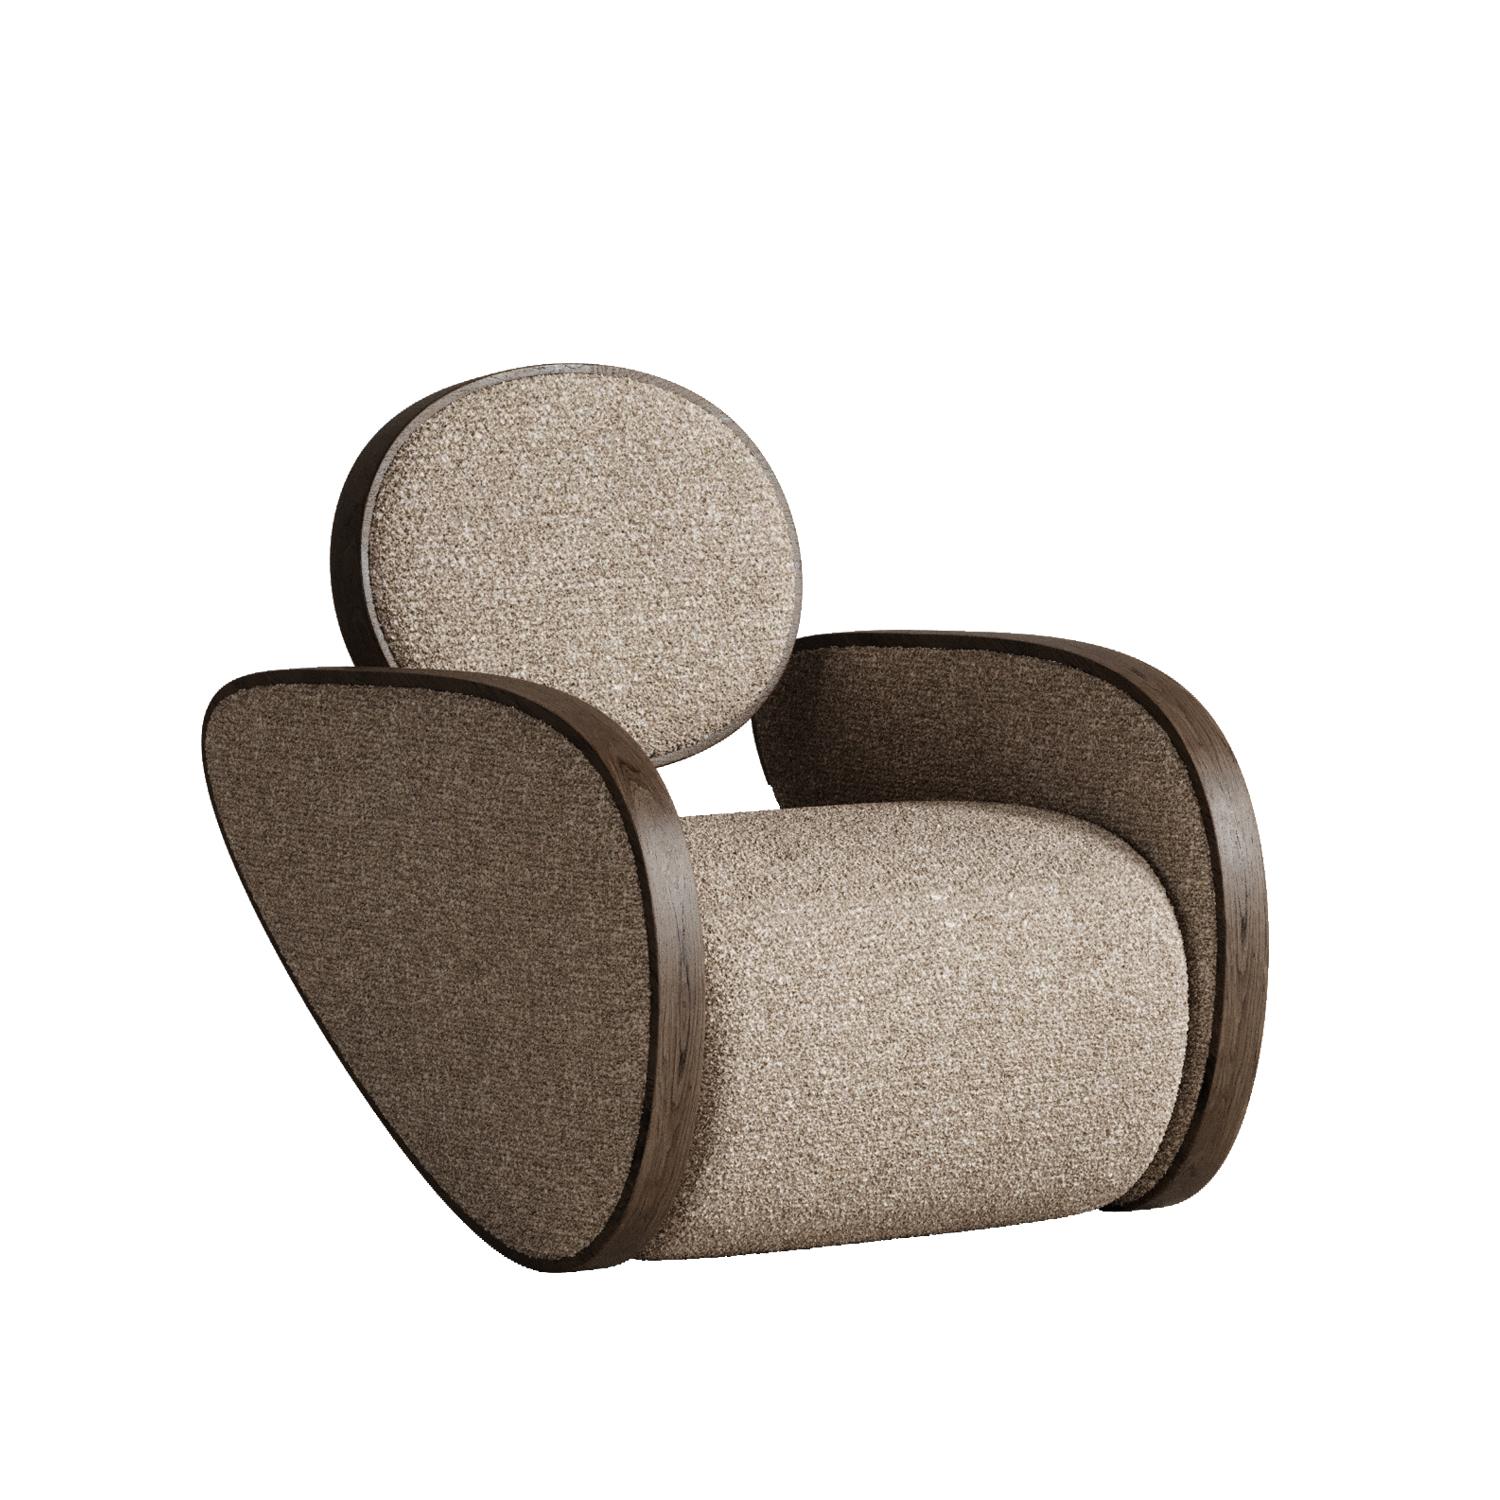 Beige Nautilus Chair by Plyus Design
Dimensions: D 100 x W 80 x H 86 cm
Materials:  Wood, HR foam, polyester wadding, fabric upholstery.

“Nautilus” chair.
“Twenty Thousand Leagues Under the Sea” Jules Verne



PLYUS Furniture creates pieces in